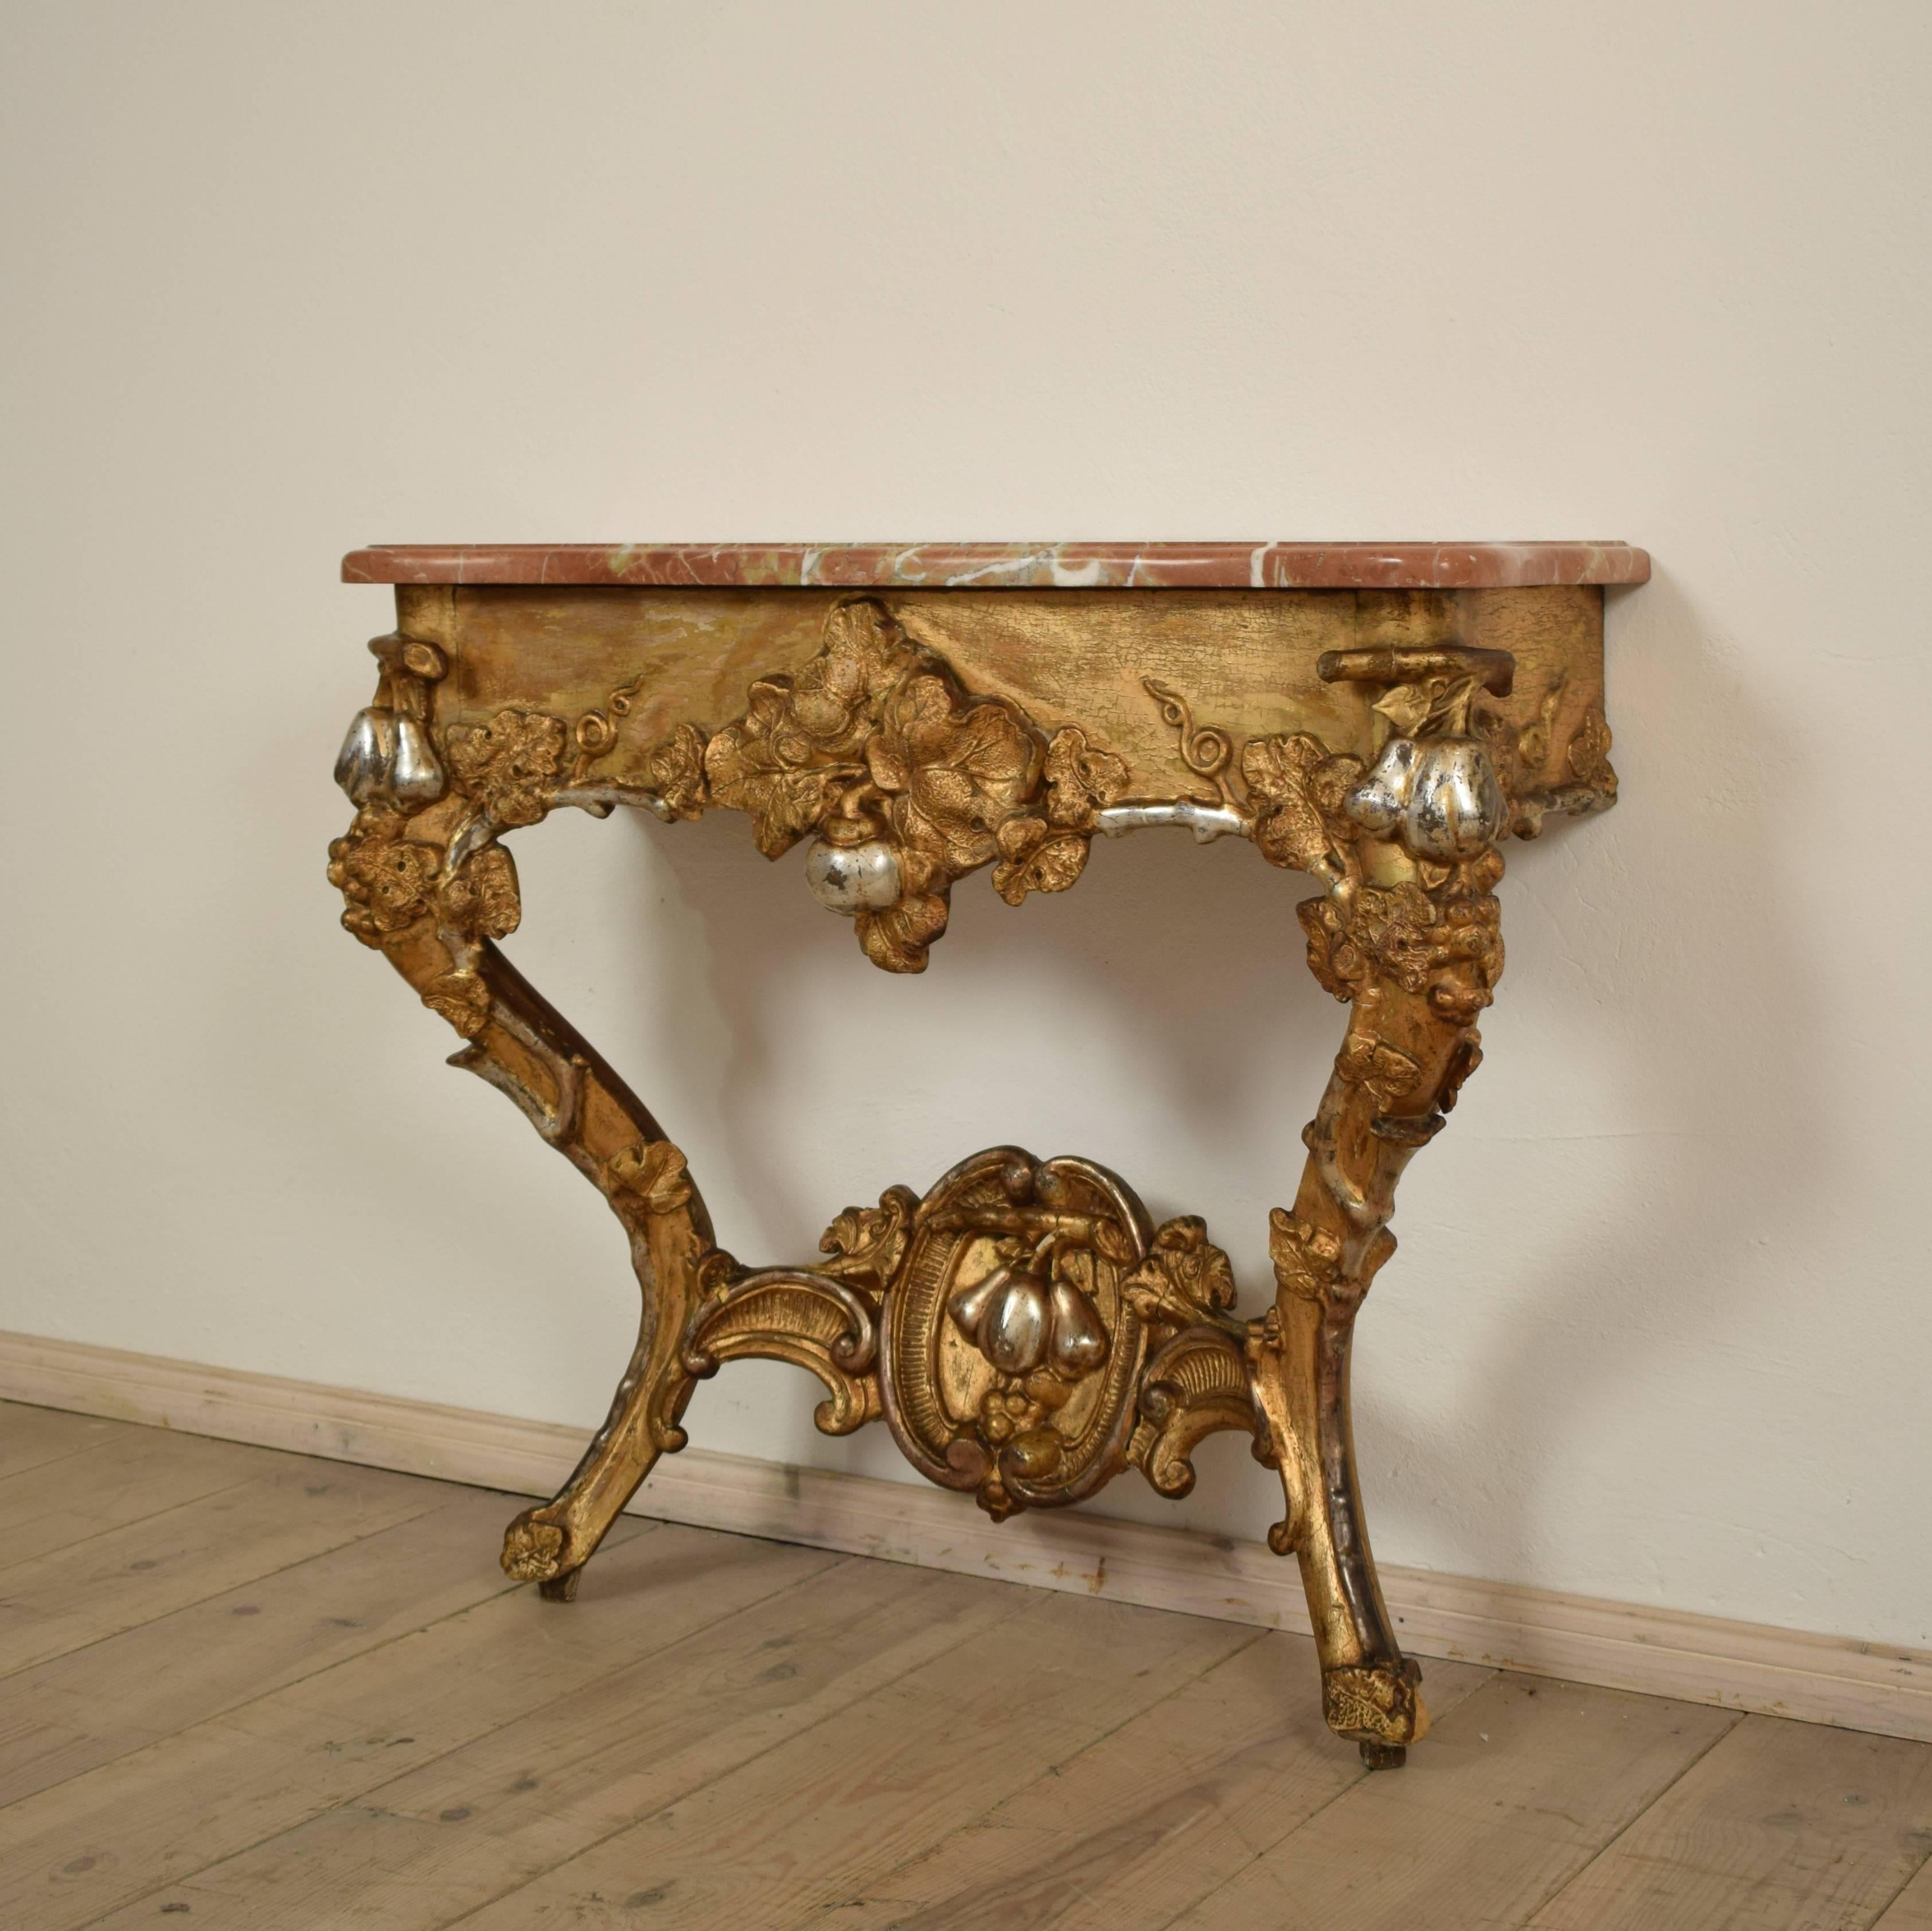 This small German console table is a real eyecatcher. The wooden base is beautifully carved and moulded and then water-gilded and silvered. It contains it original gilding and has a great Patina.
The beautiful red marble top got replaced at some